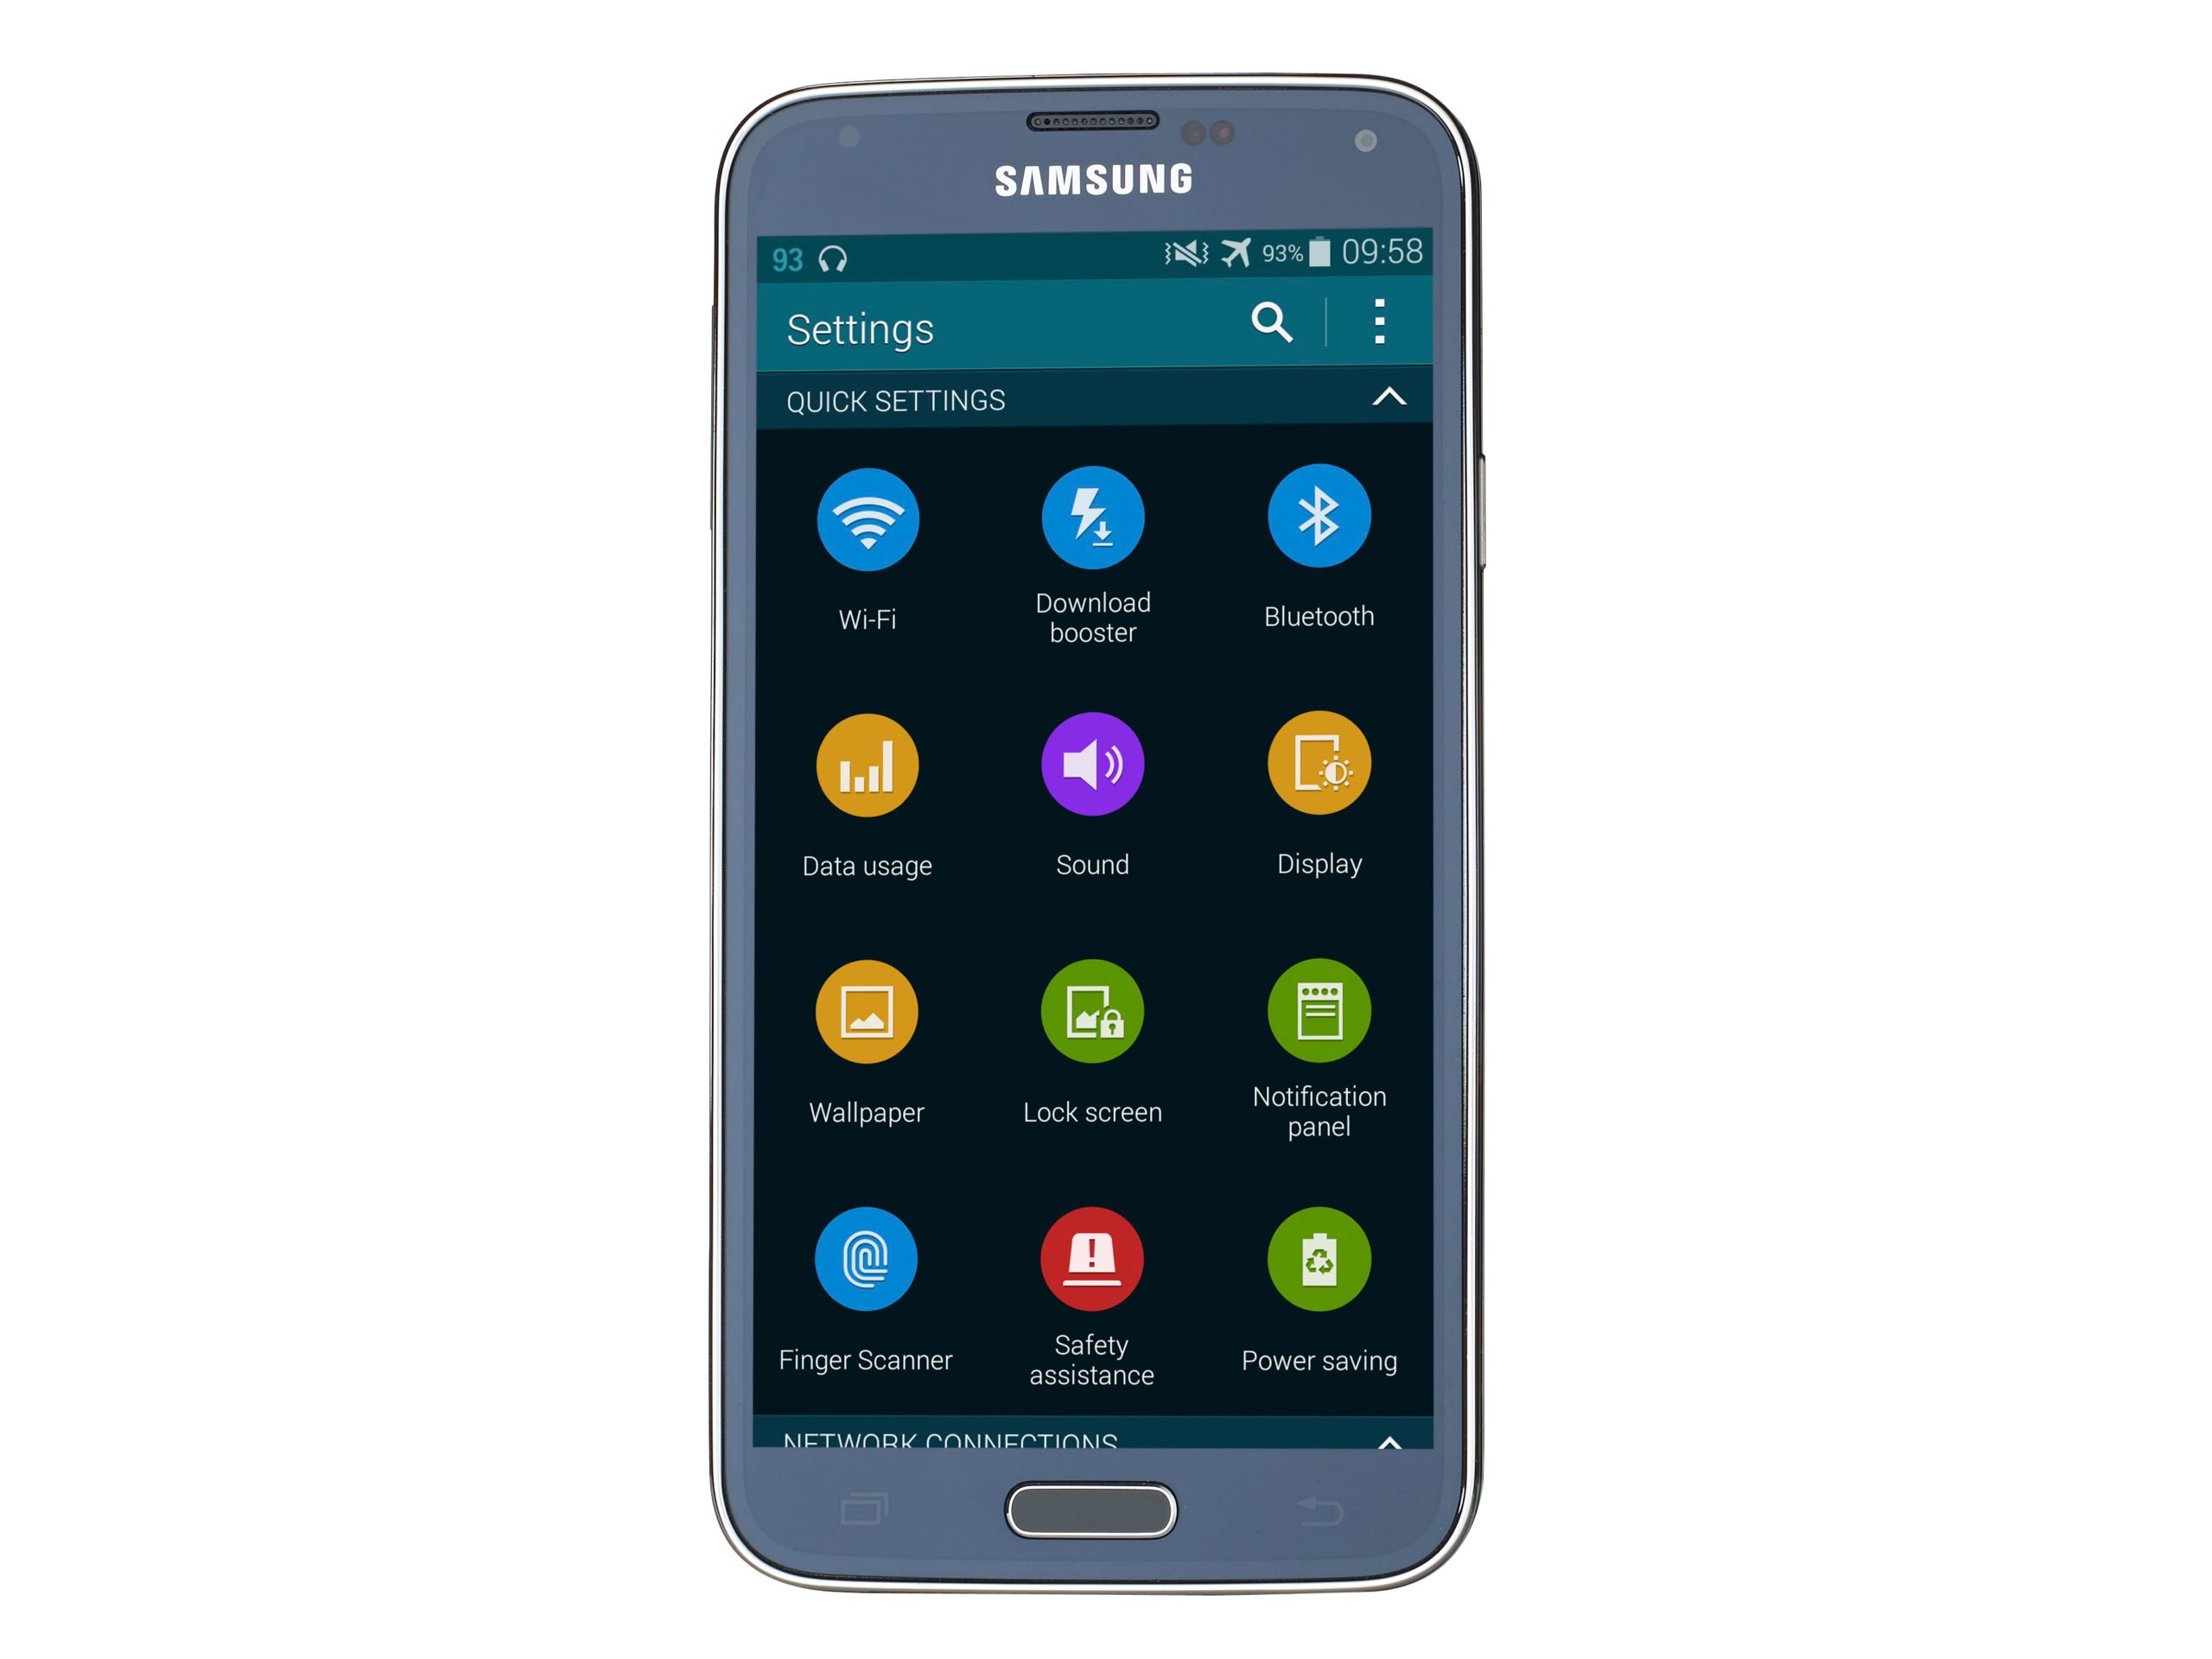 Vertrappen tobben smog Samsung Galaxy S5 review: The once great all-rounder steps down